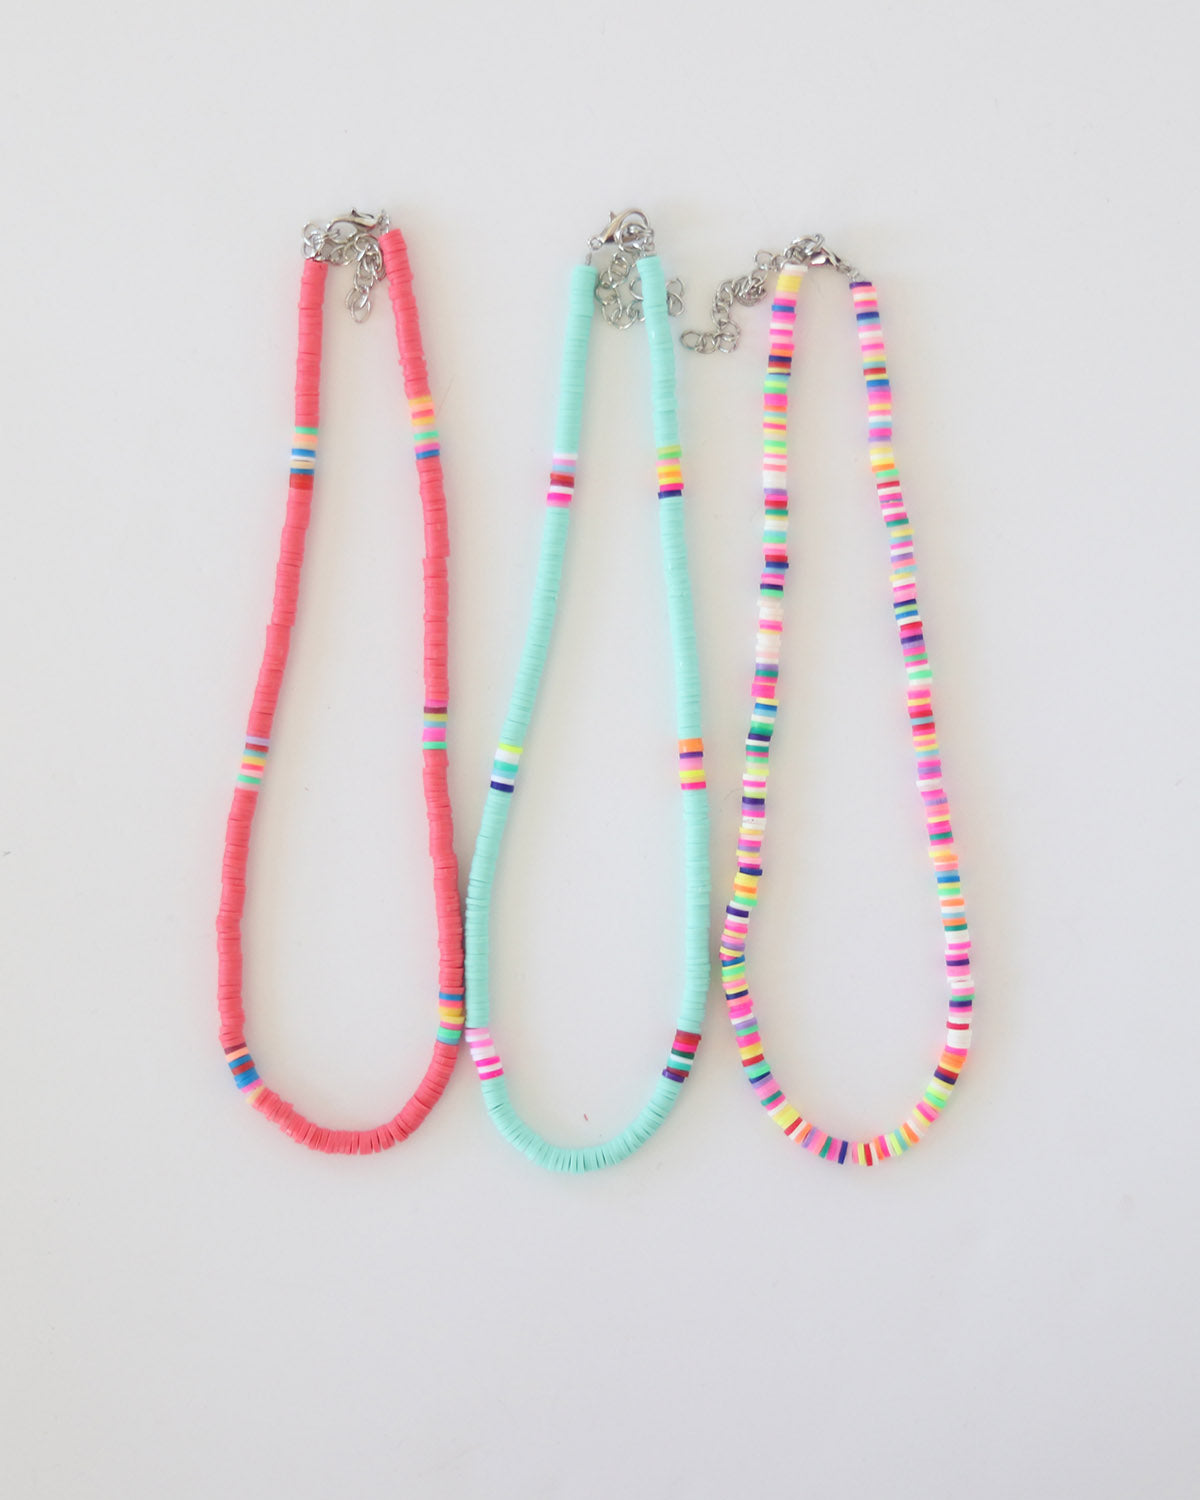 Candy Chain Necklace